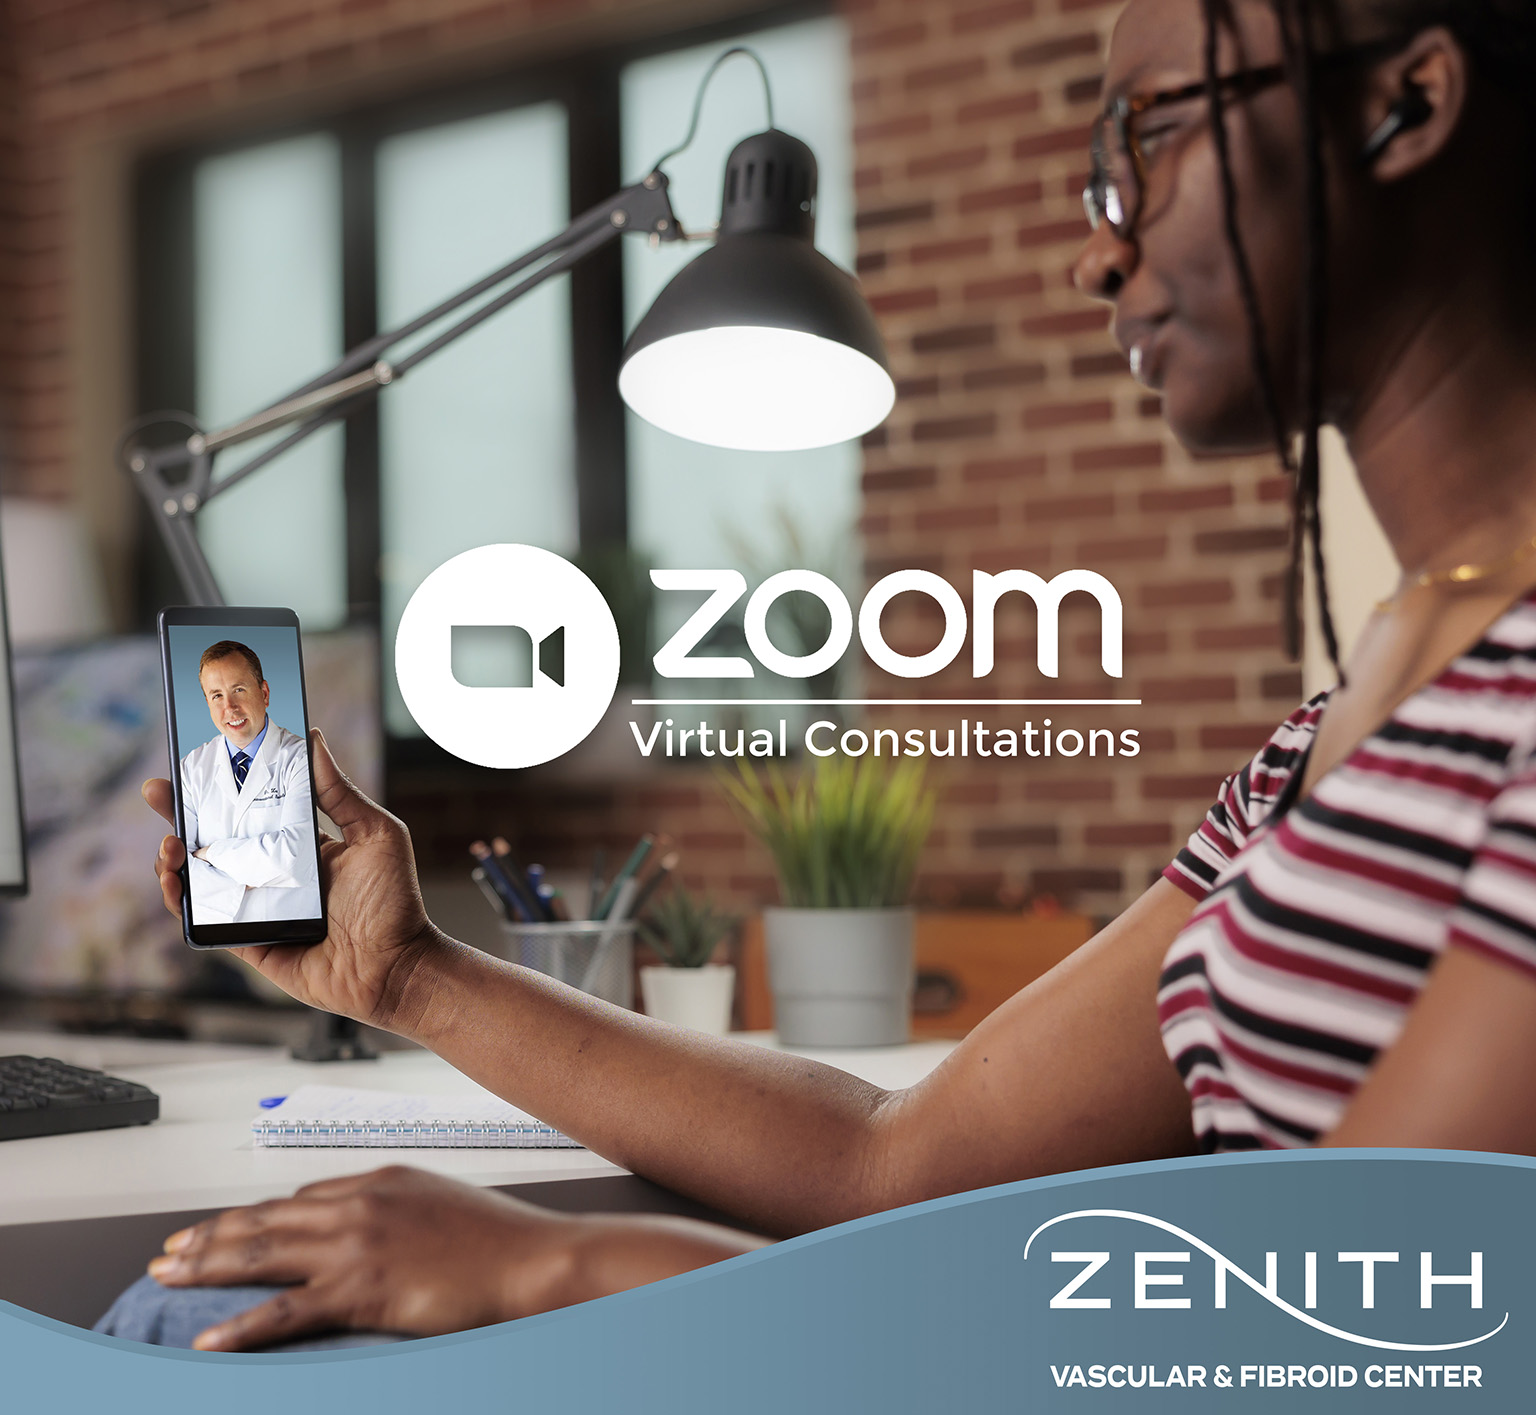 Vascular health consultations on zoom with Zenith Vascular and Fibroid Center